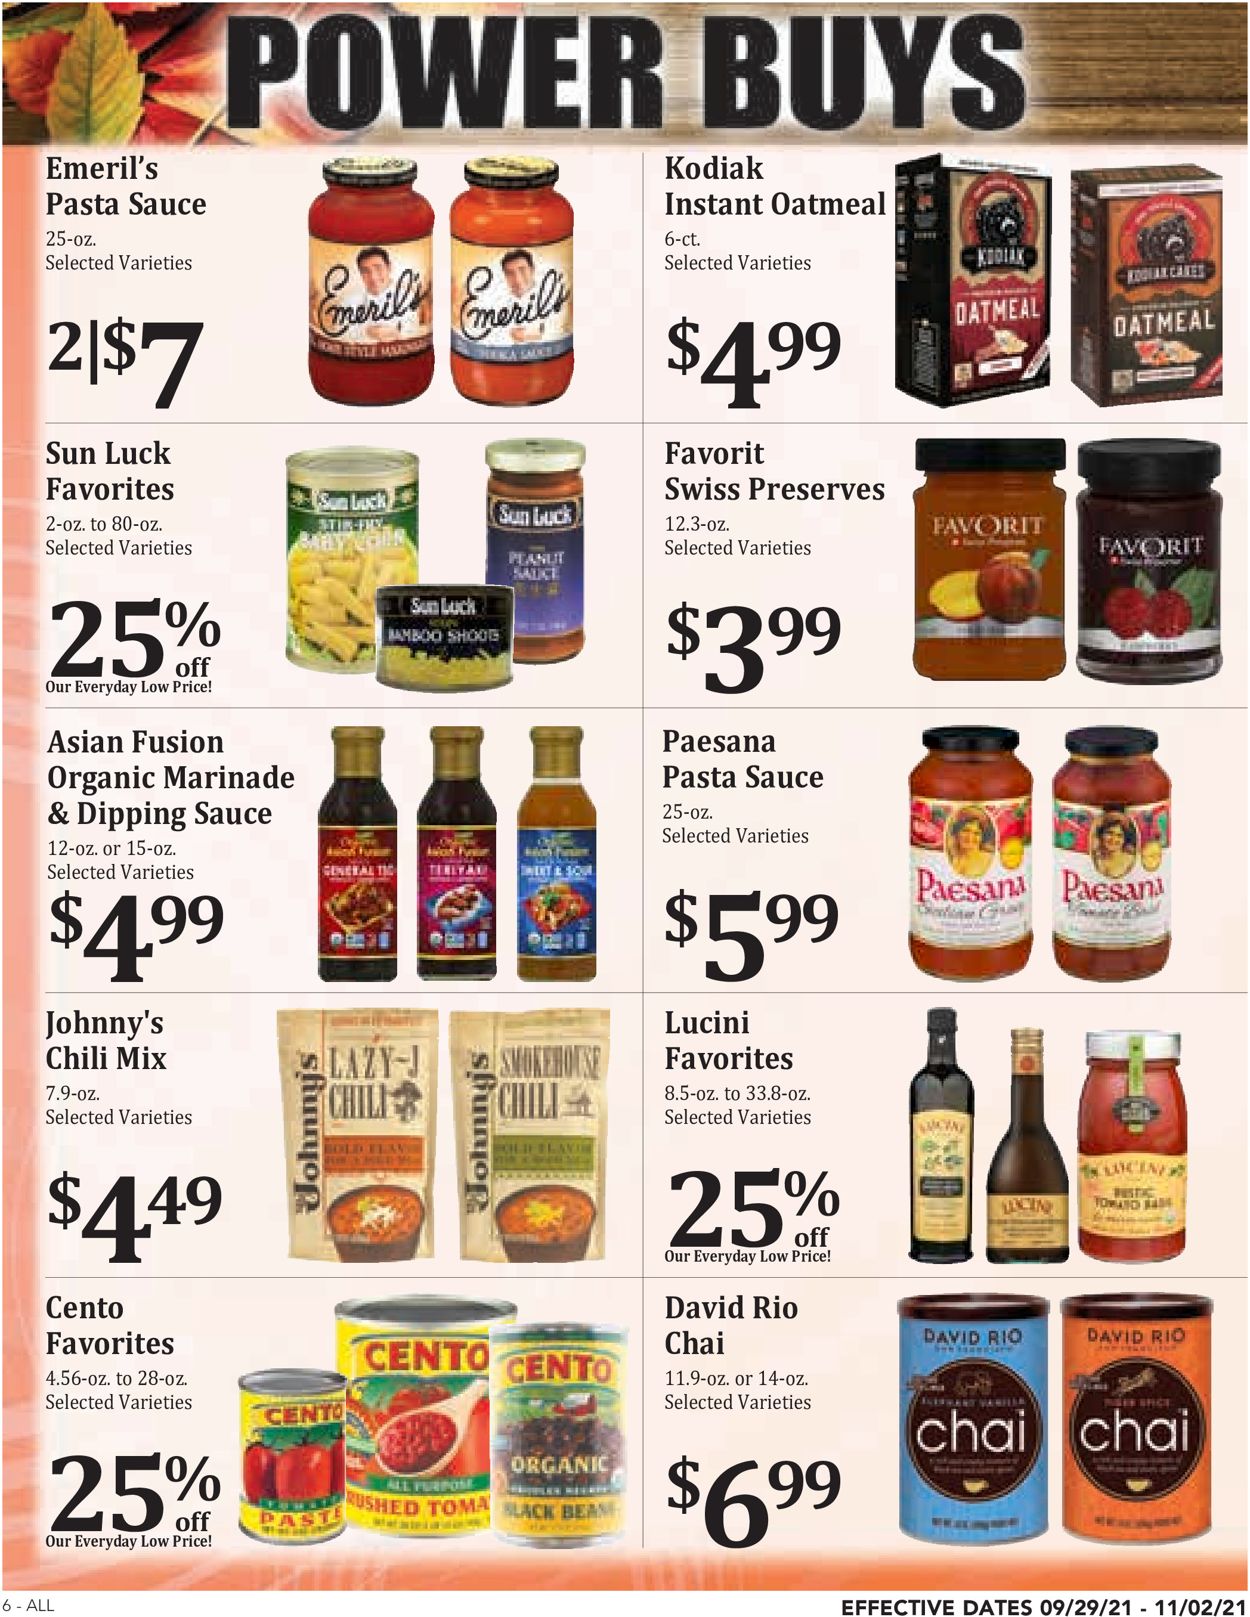 Rosauers Ad from 09/29/2021